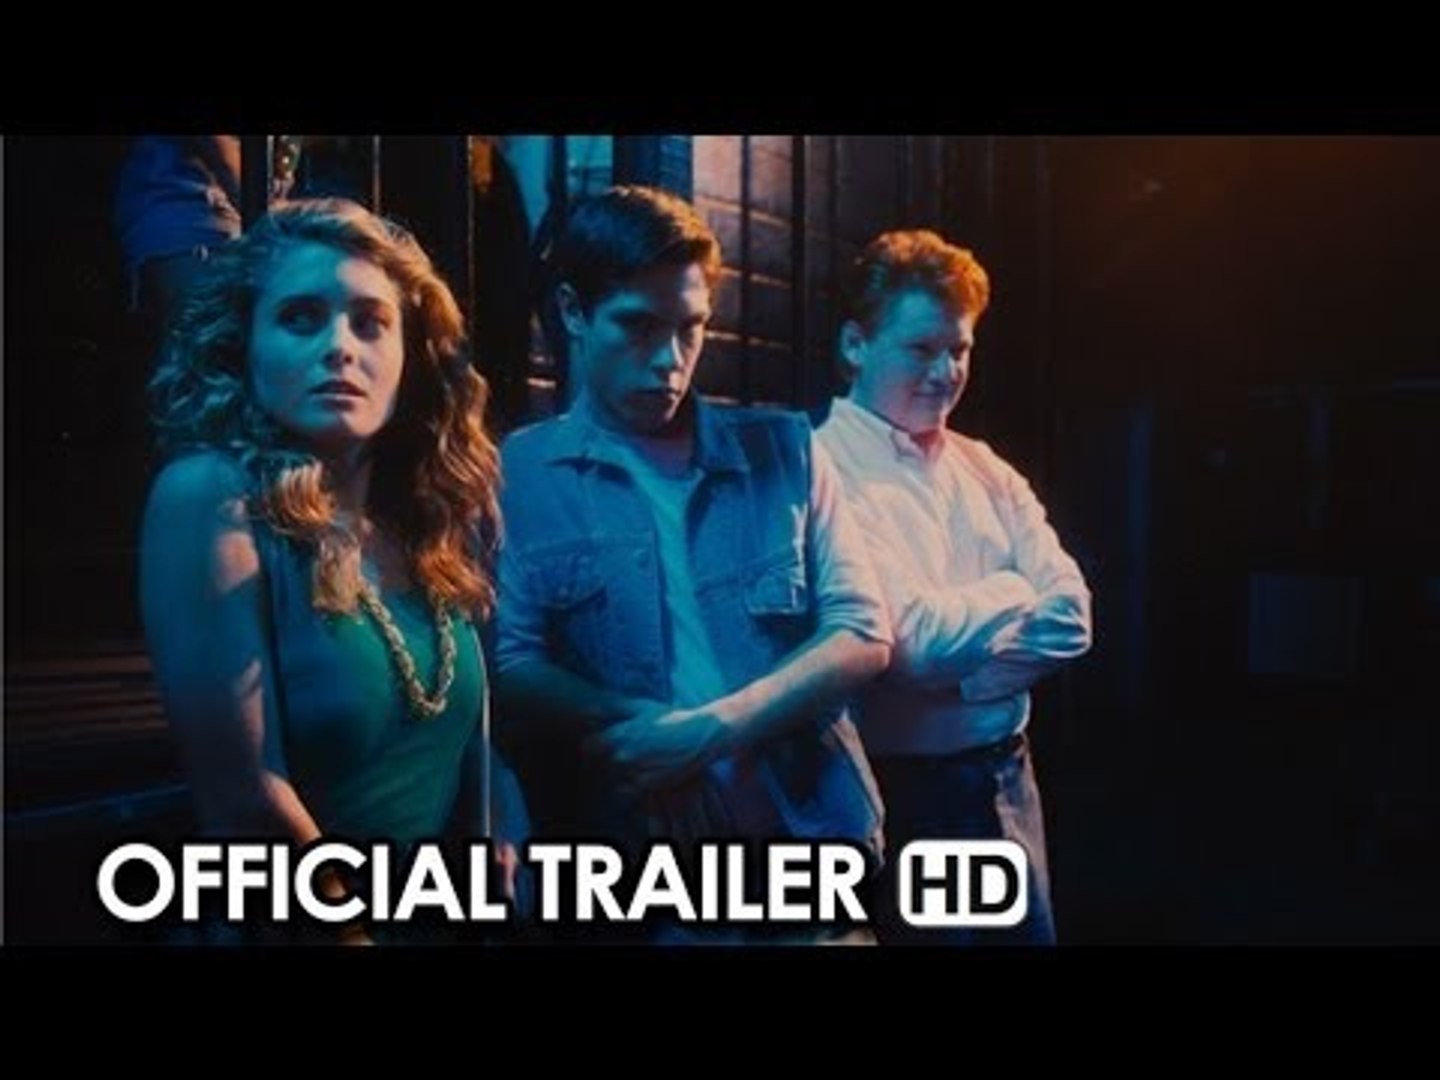 The Stuff Official Trailer HD 